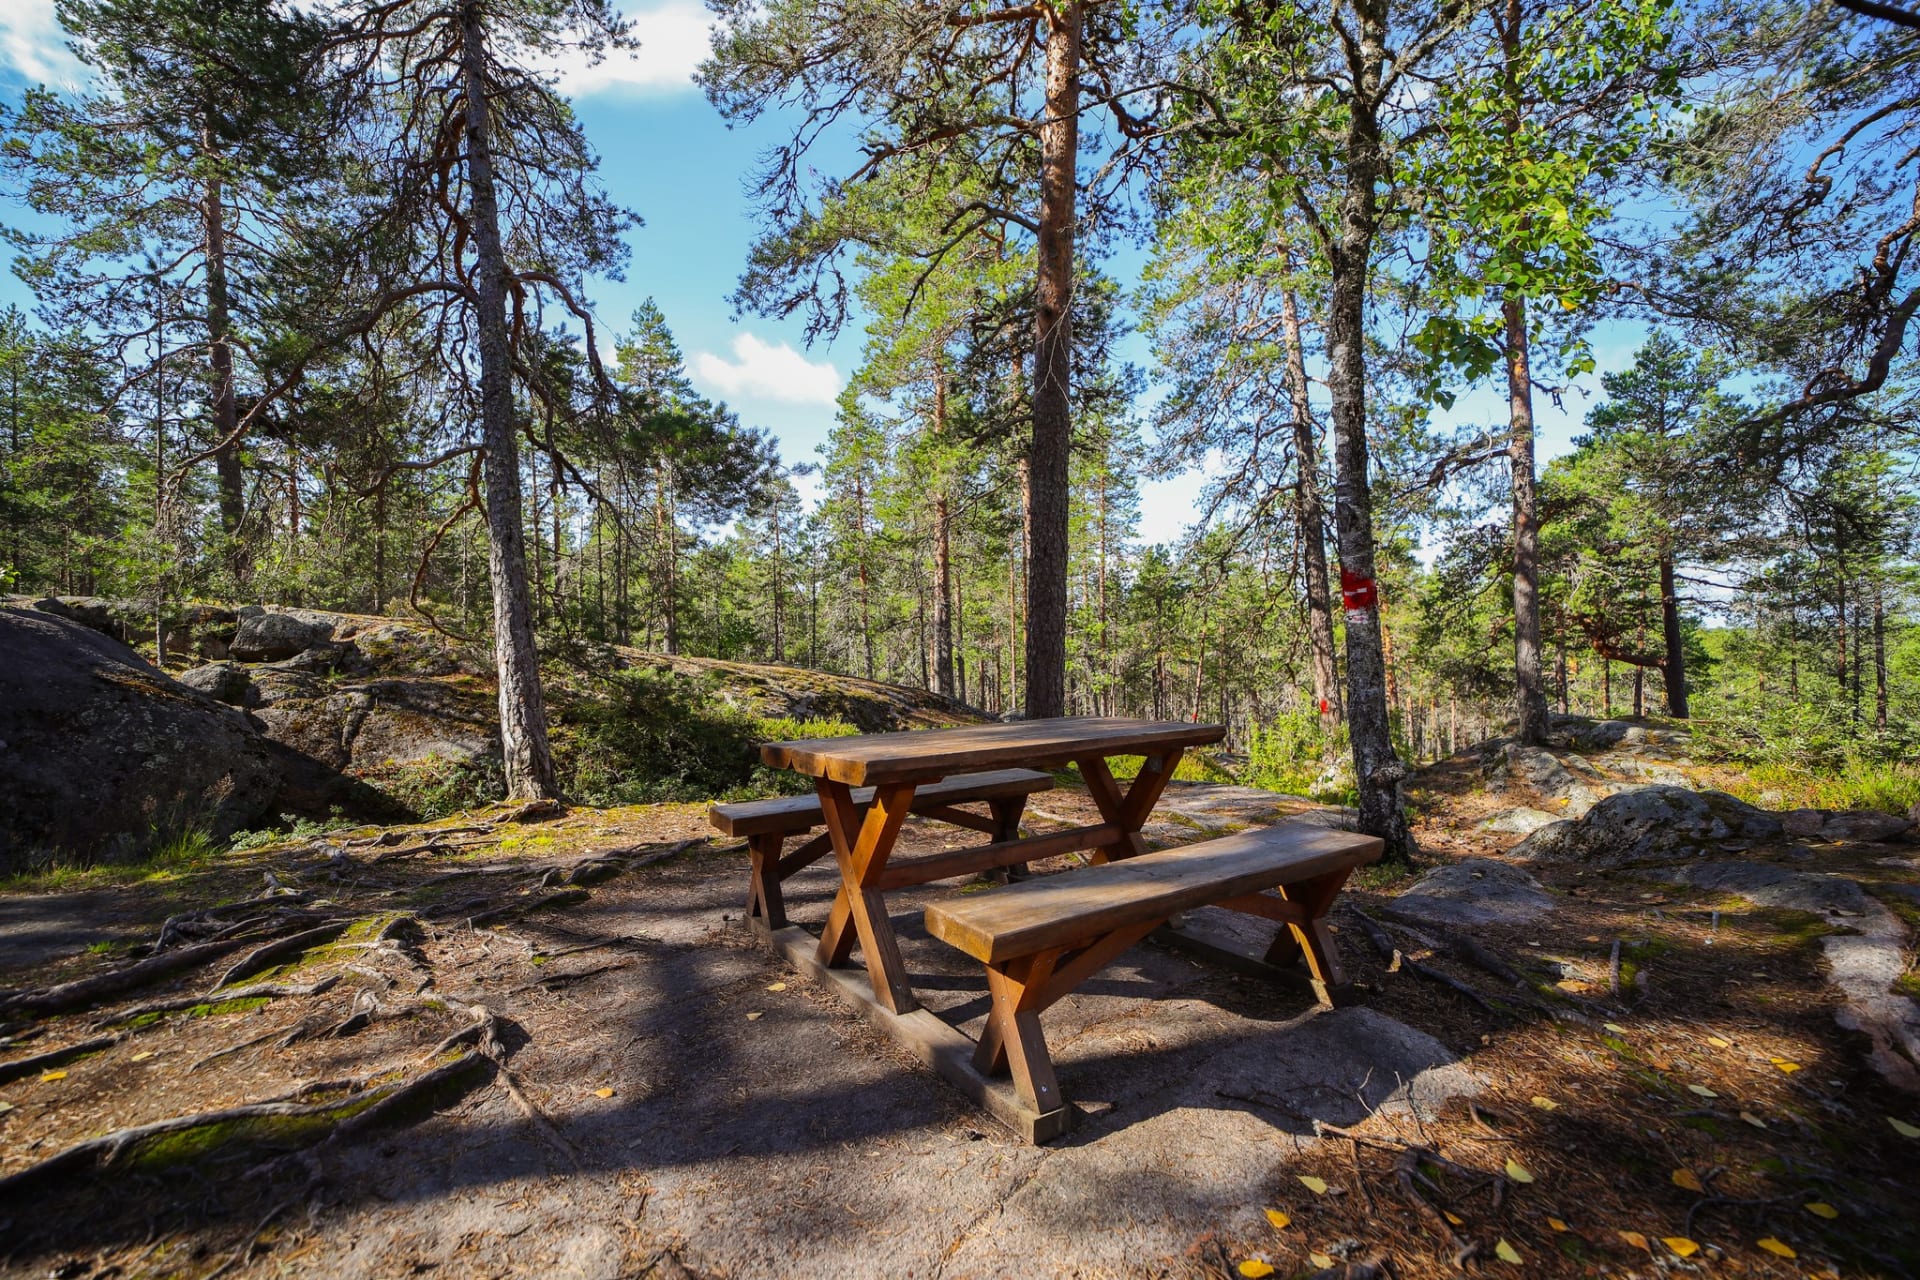 There are several table groups for picnics on Käskyvuori.